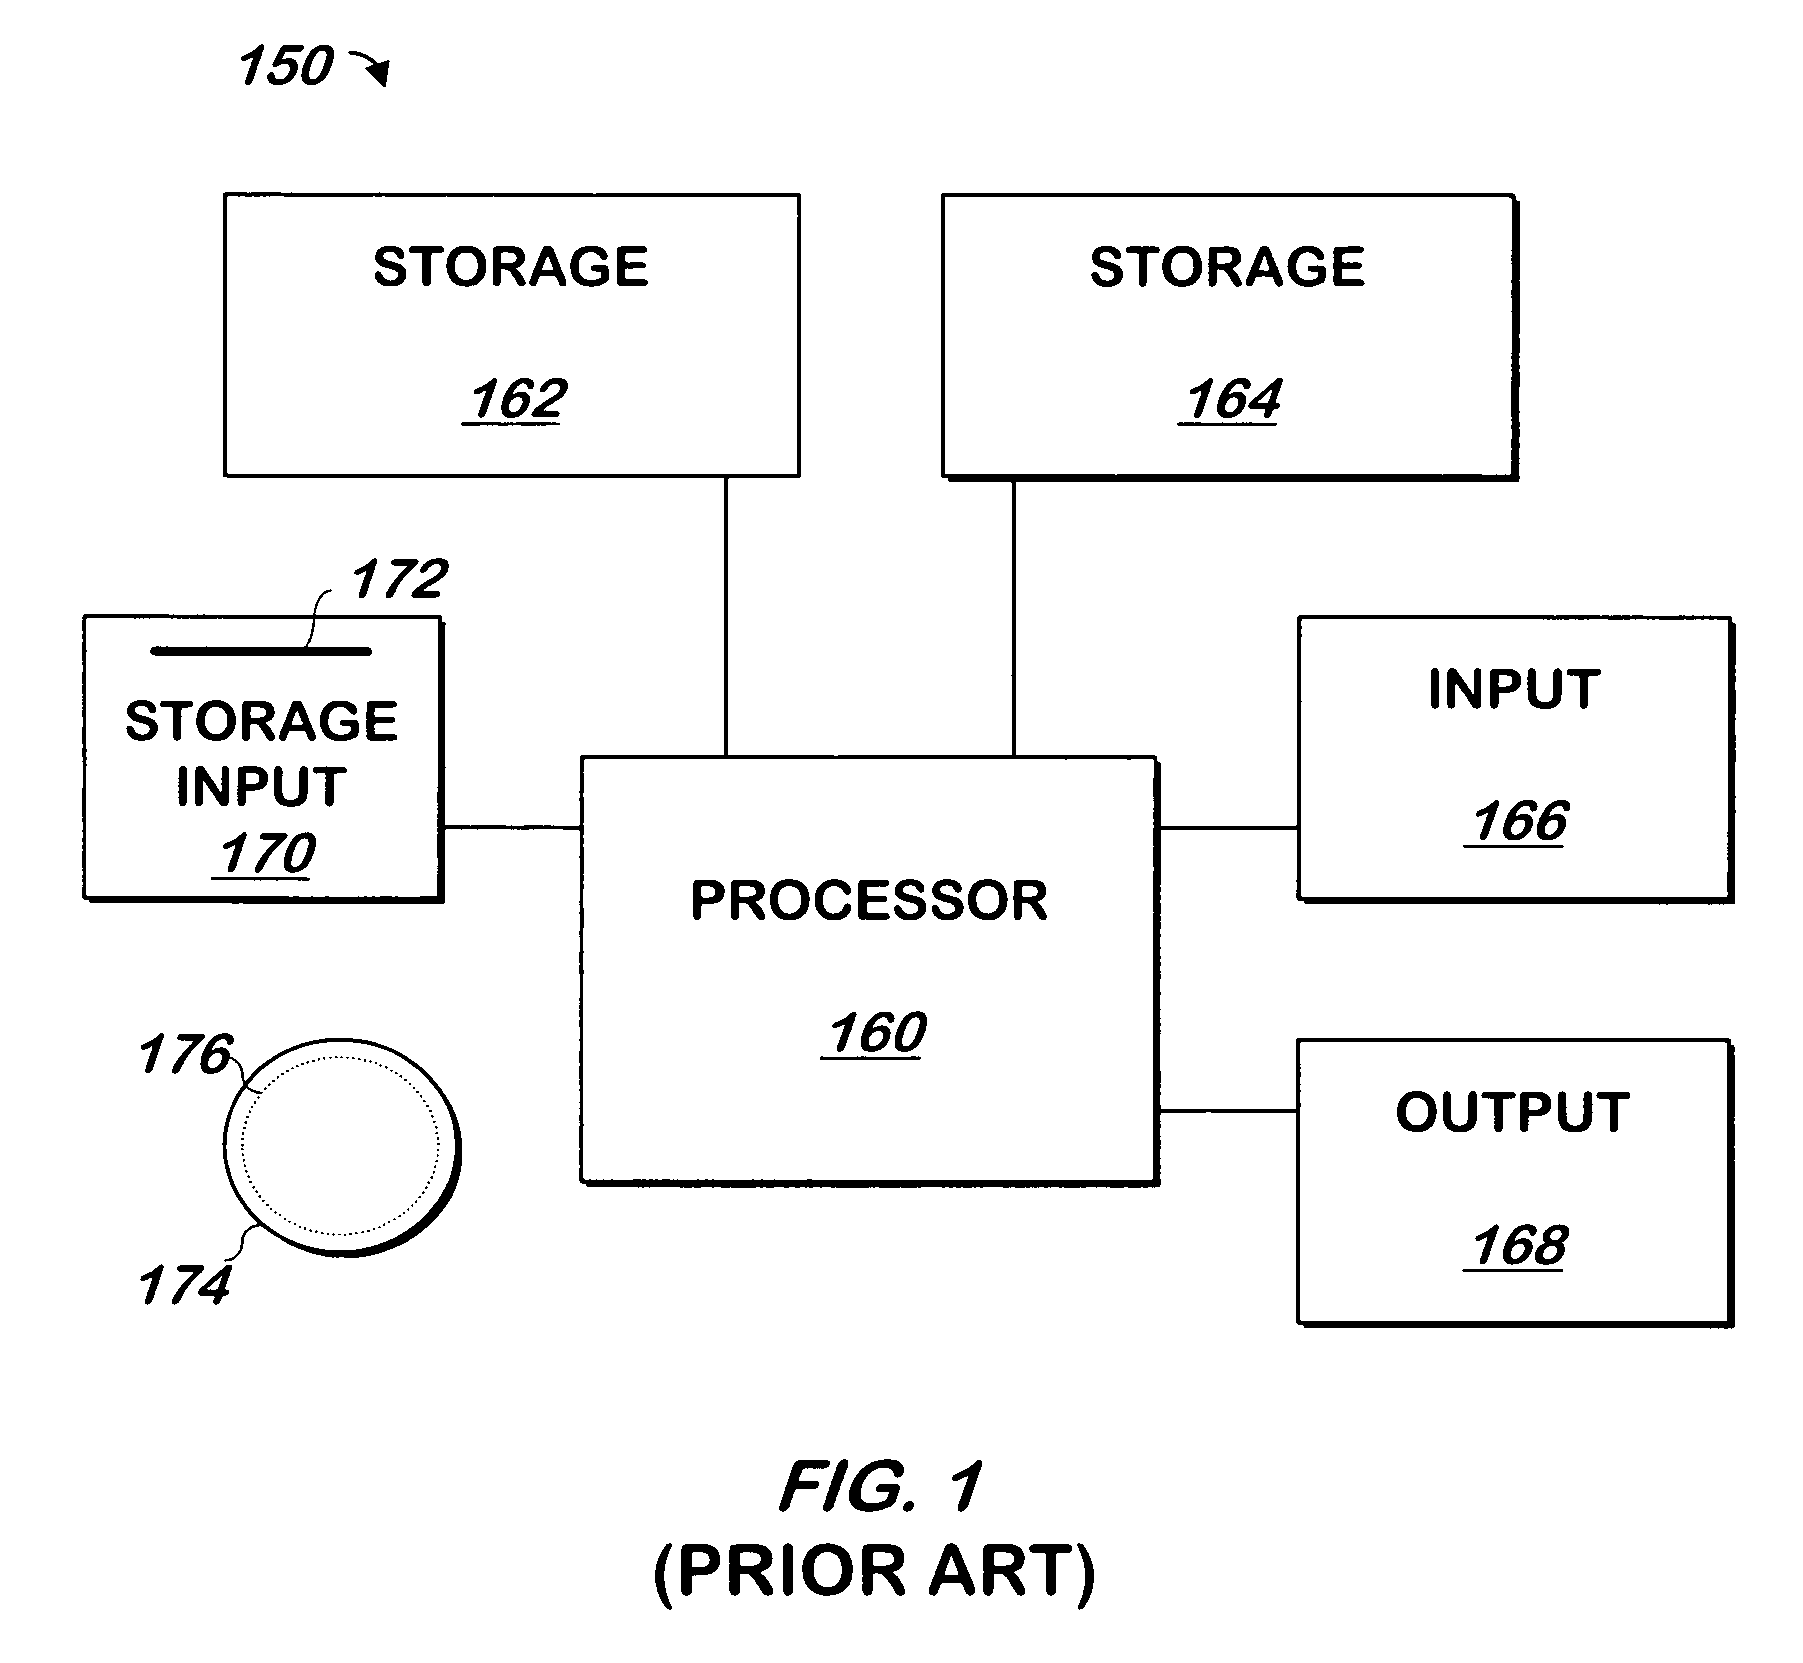 System and method for providing document security, access control and automatic identification of recipients